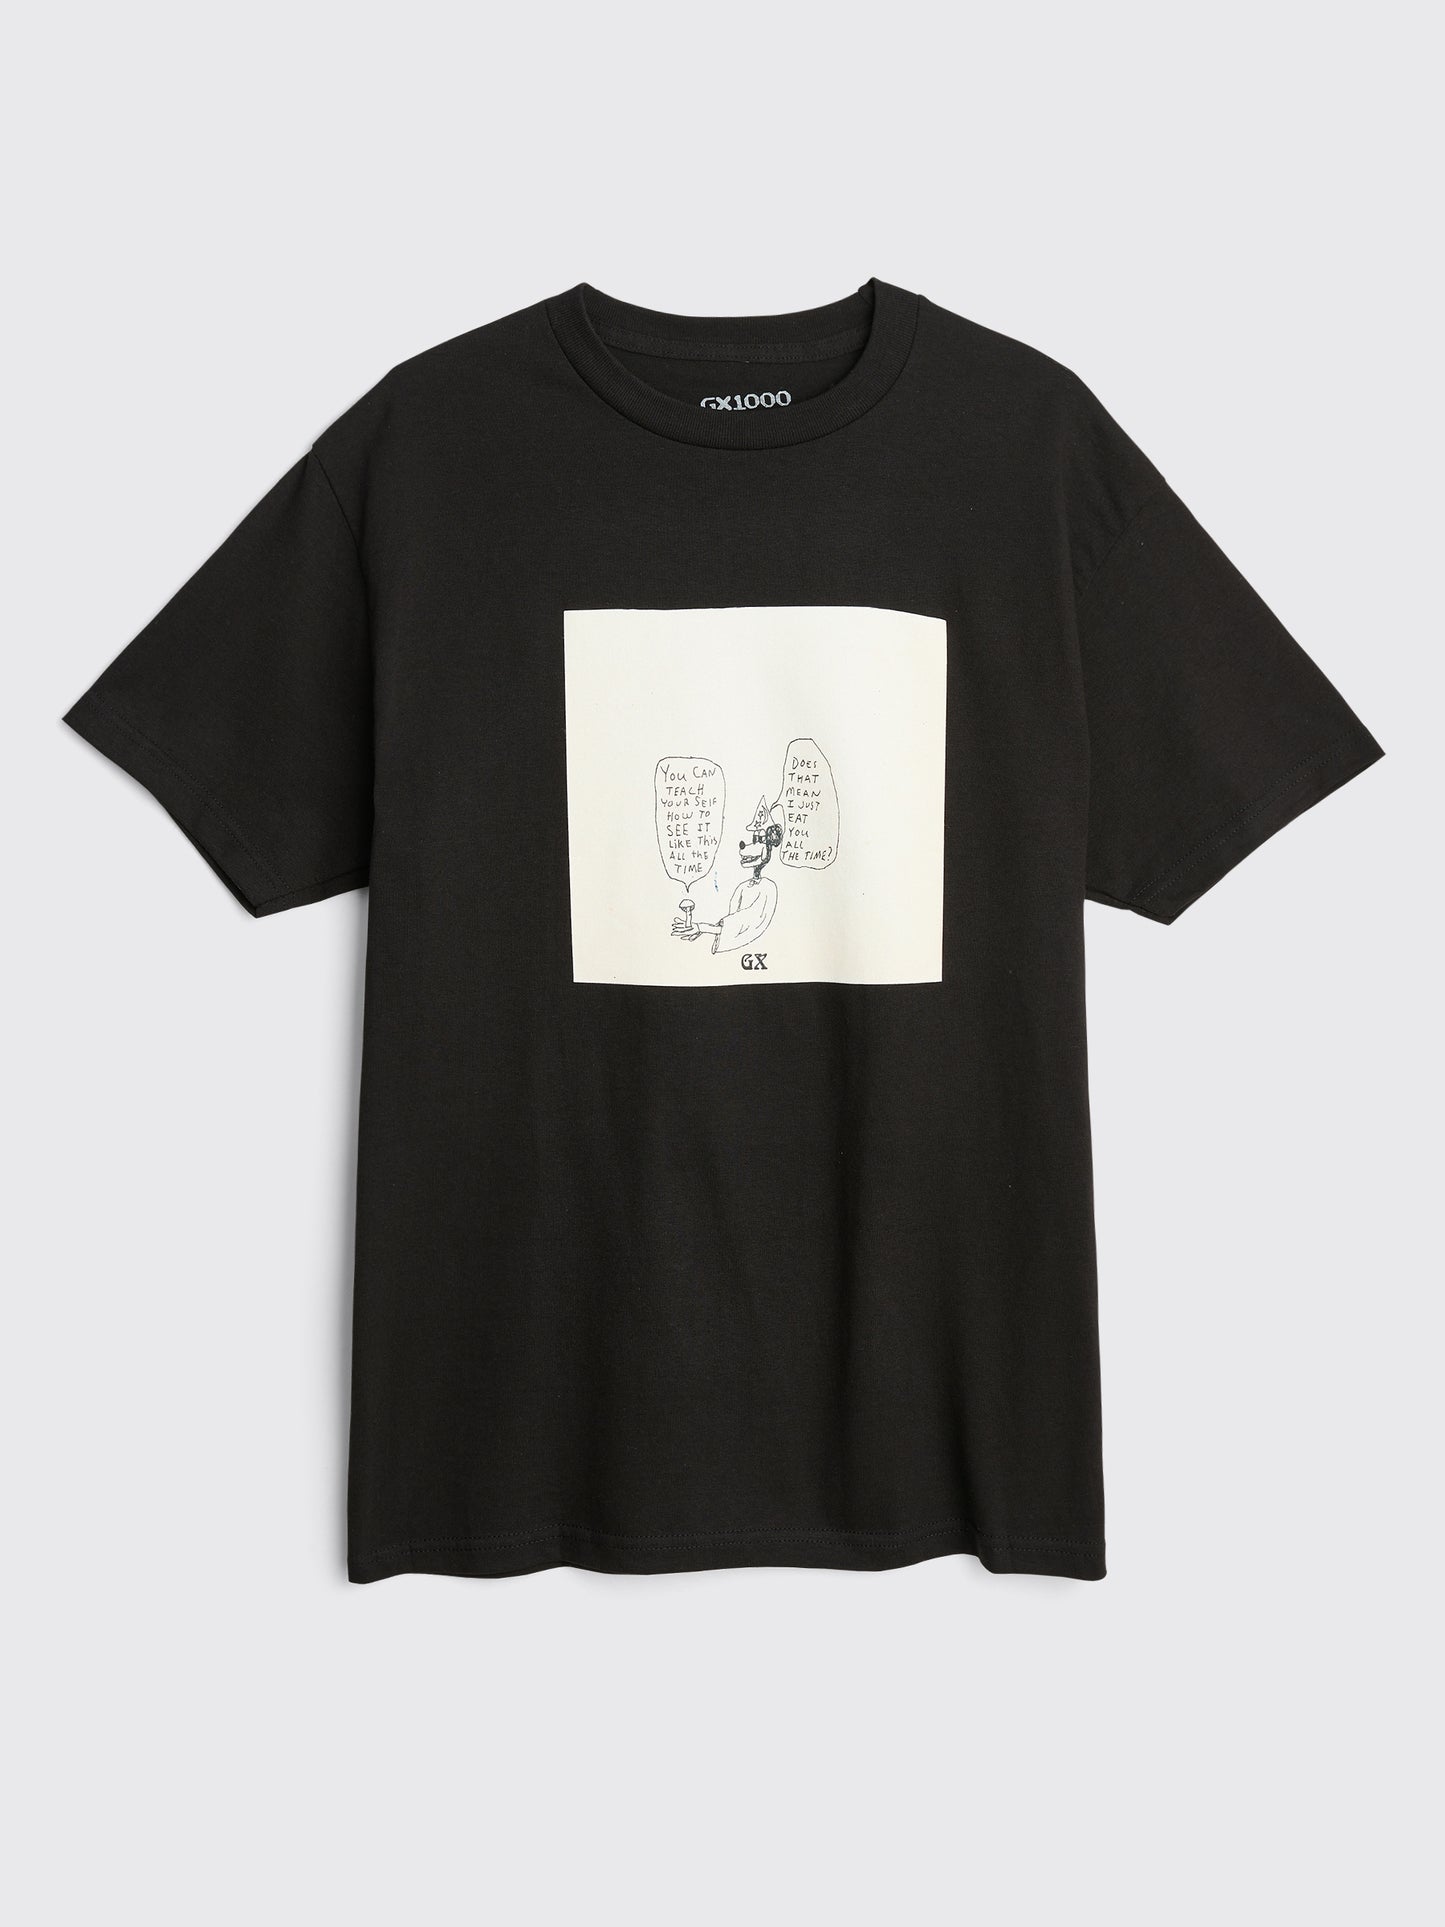 GX1000 All The Time Tee